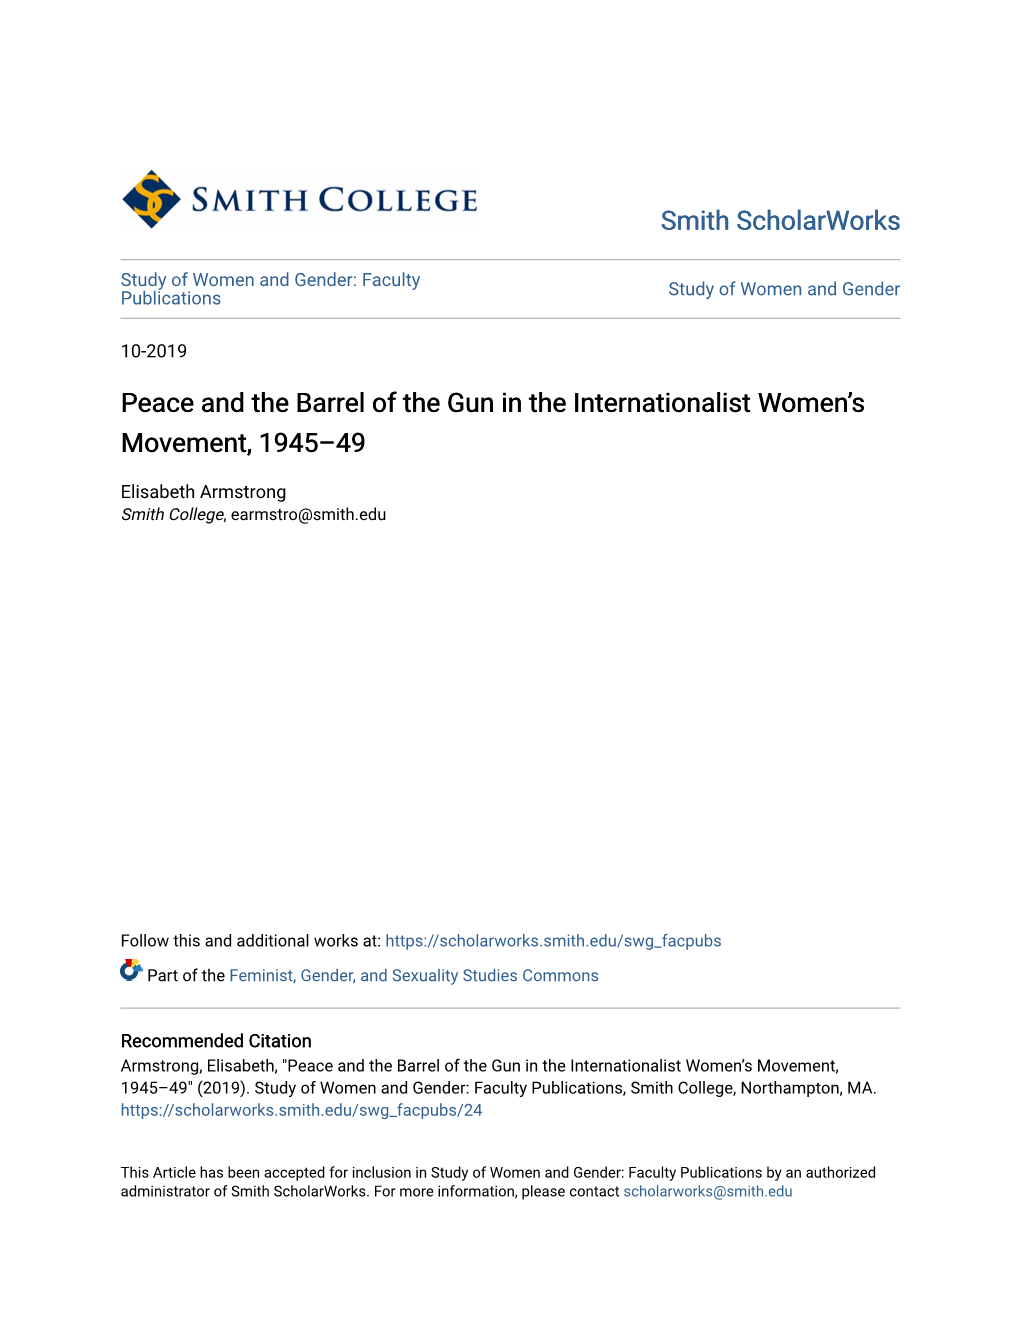 Peace and the Barrel of the Gun in the Internationalist Womenâ•Žs